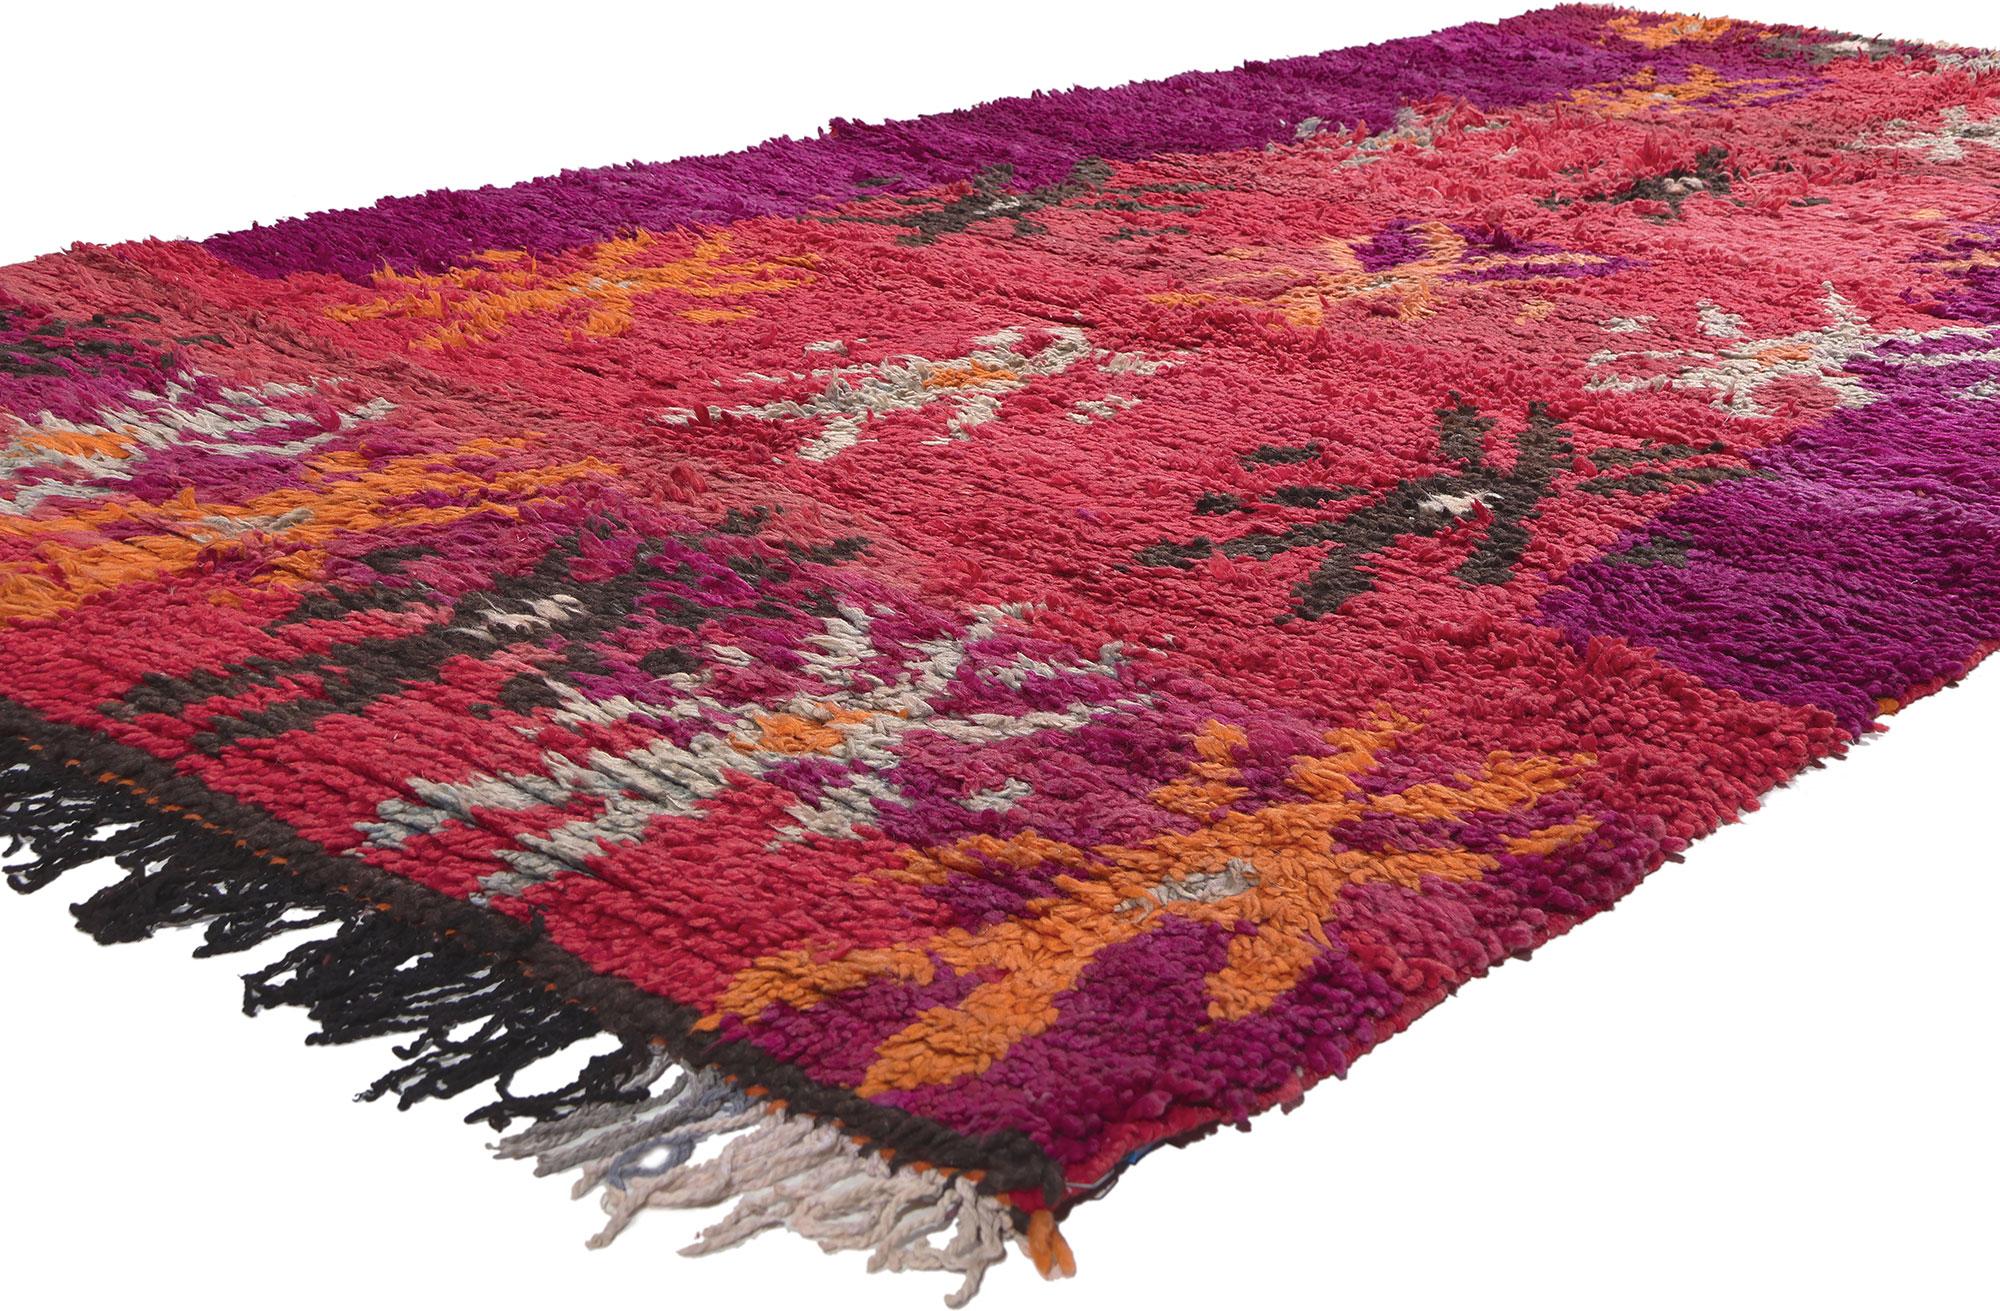 20675 Vintage Talsint Moroccan Rug, 05'05 x 11'08. From the heart of the Figuig province, home to the Ait Bou Ichaouen tribe, emerges the Talsint Moroccan rug, named after the rural town of Talsint in Northeastern Morocco, celebrated for its vibrant